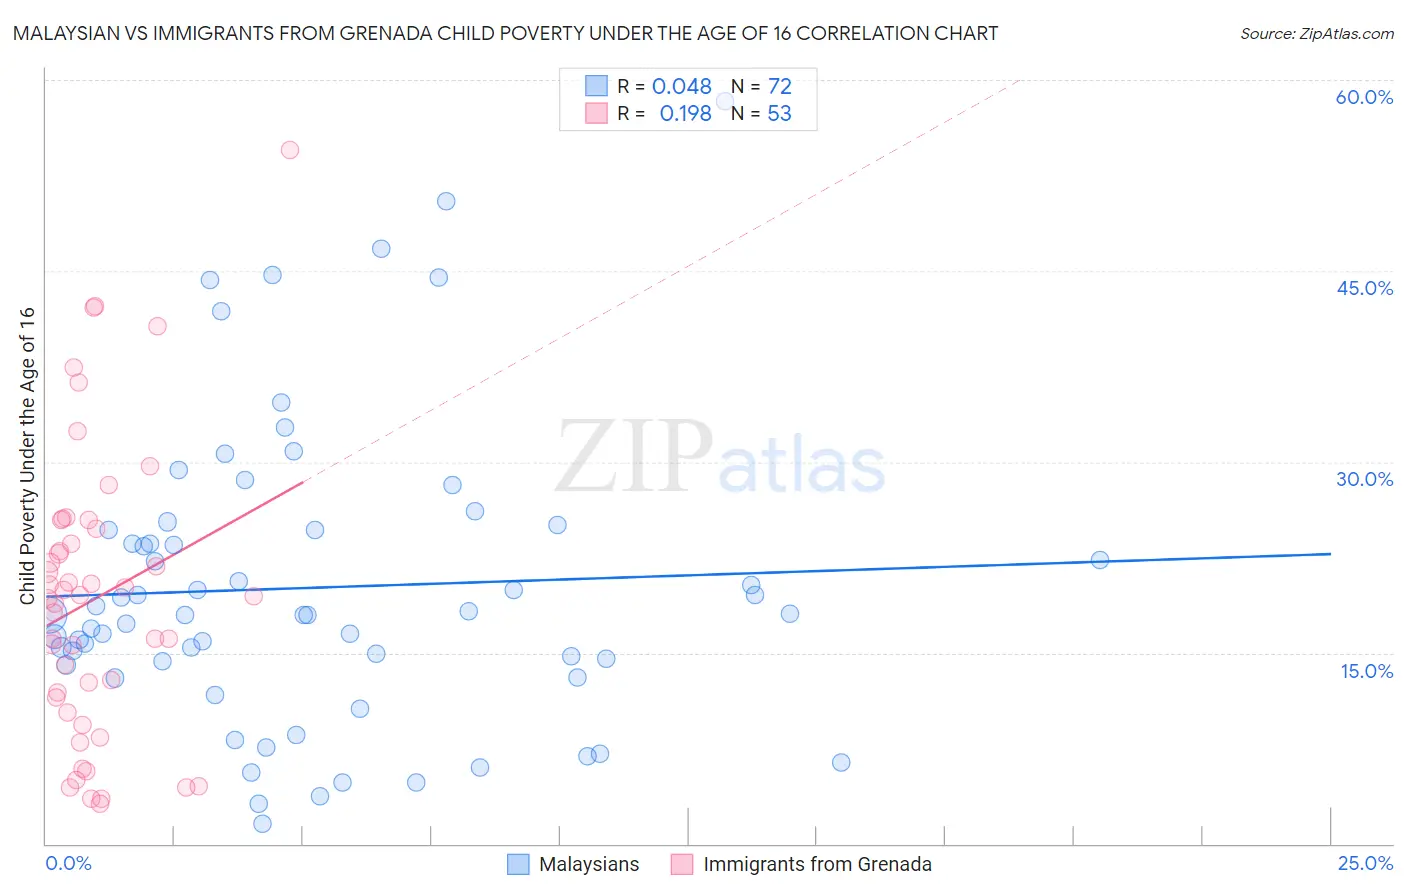 Malaysian vs Immigrants from Grenada Child Poverty Under the Age of 16